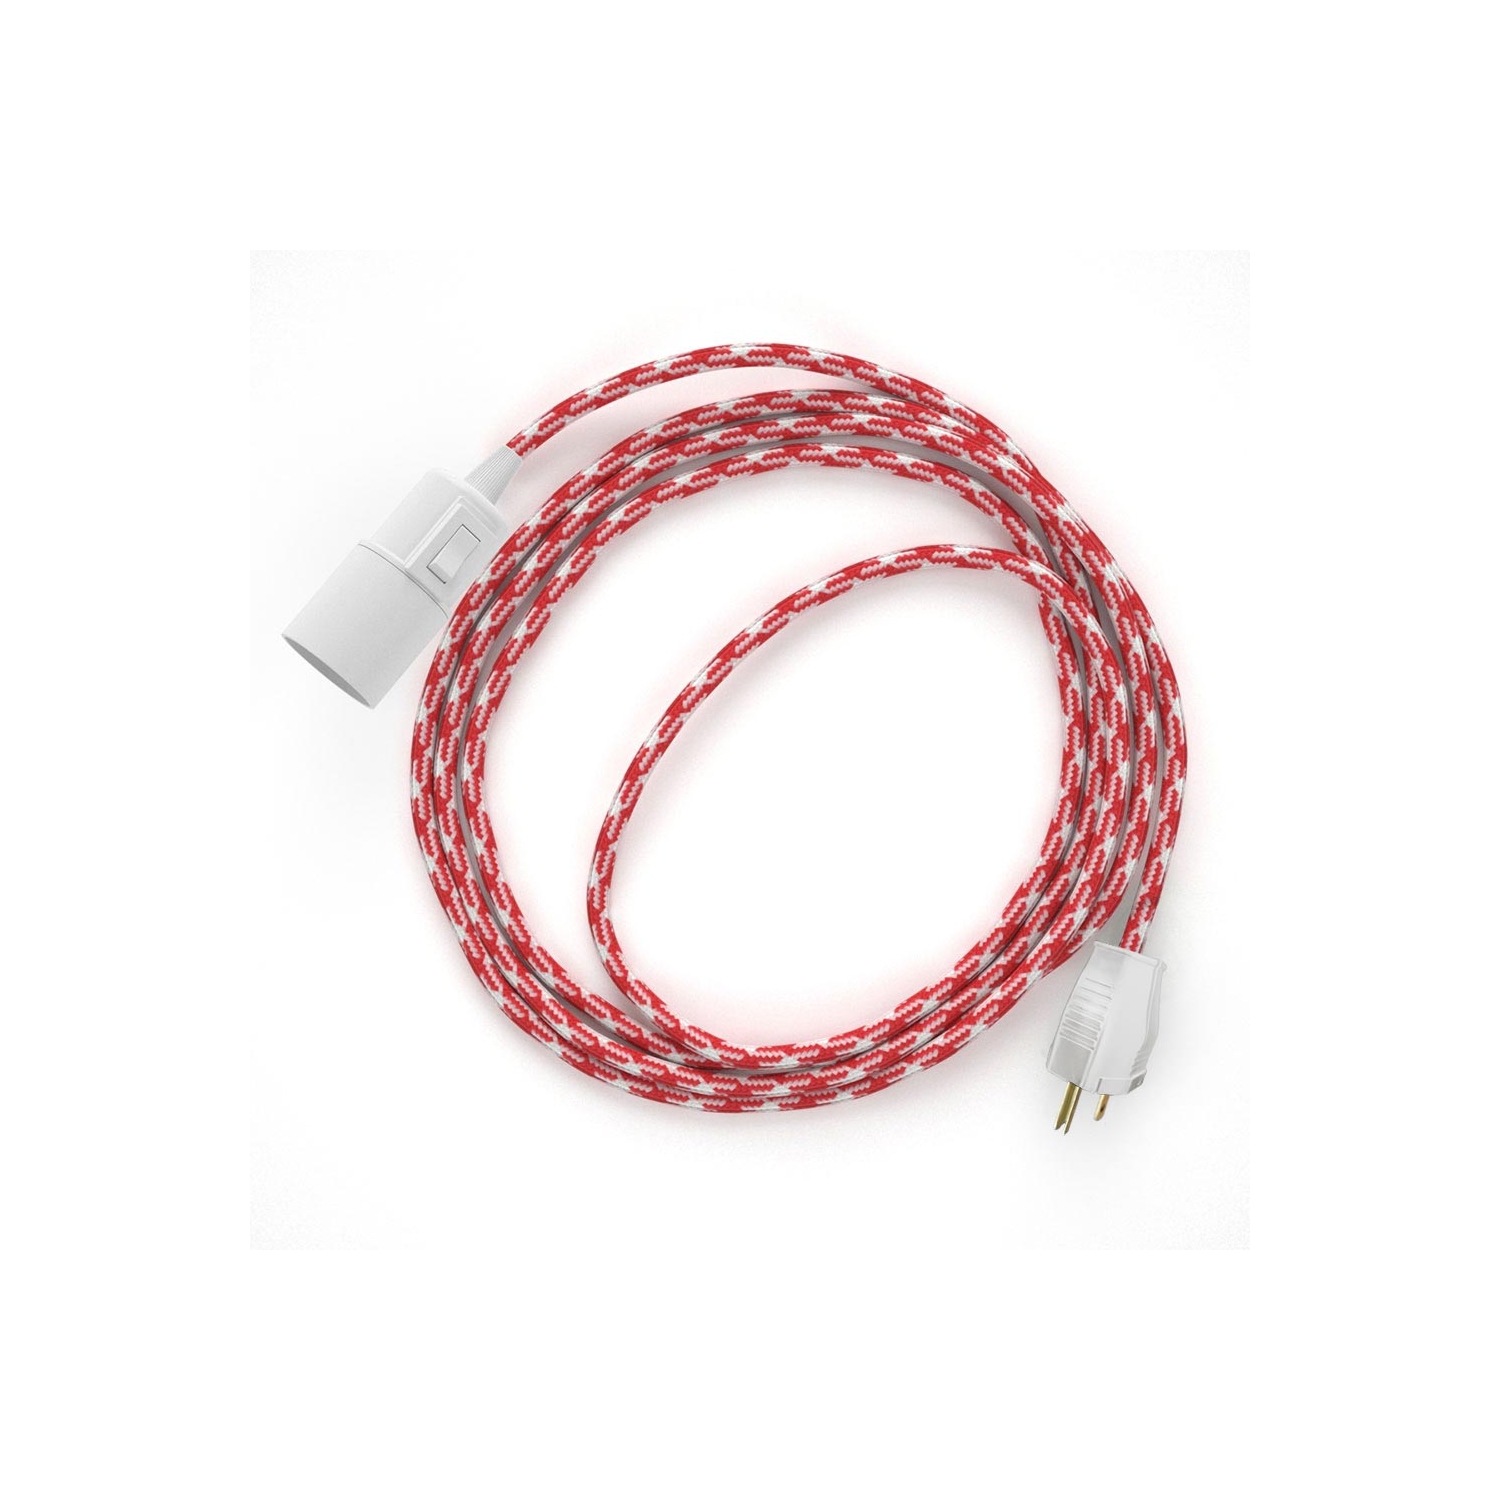 Plug-in Pendant with switch on socket | RP09 Red & White Houndstooth